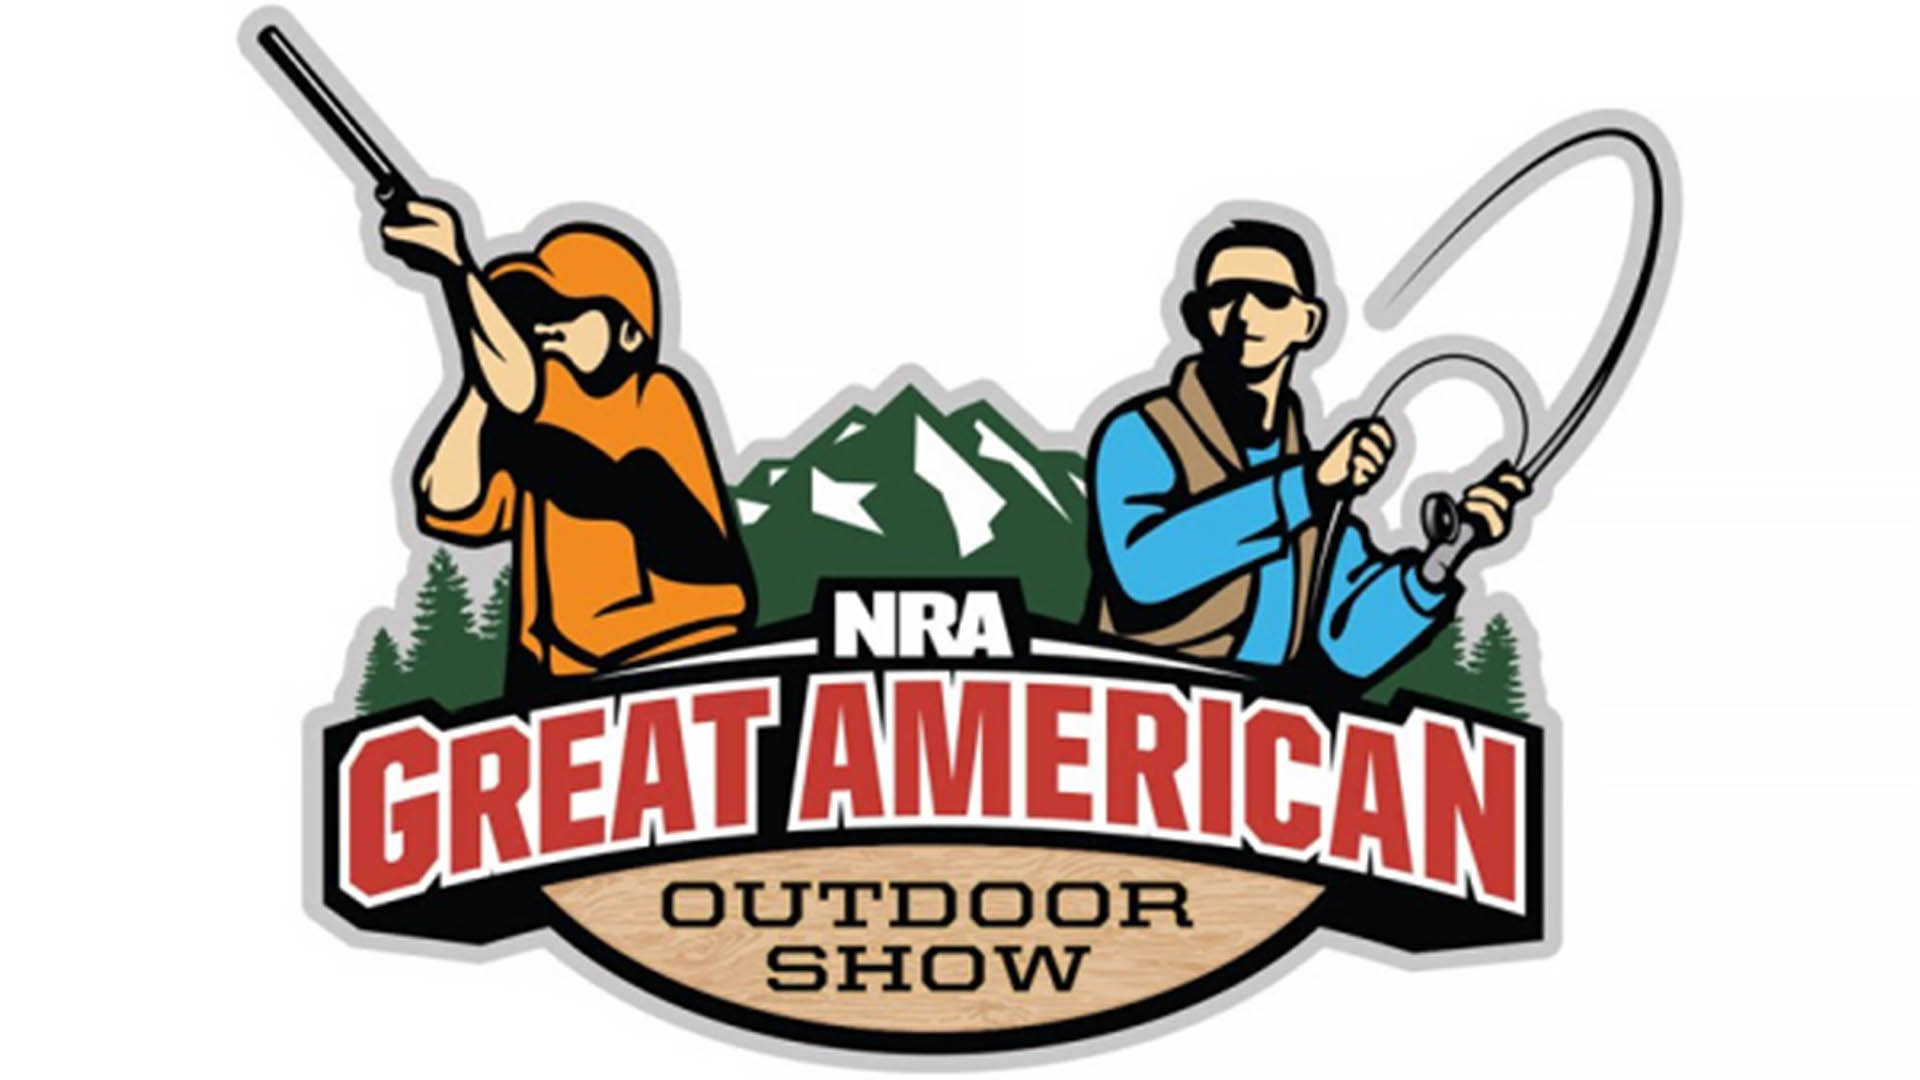 Great American Outdoor Show Returns This Weekend An Official Journal